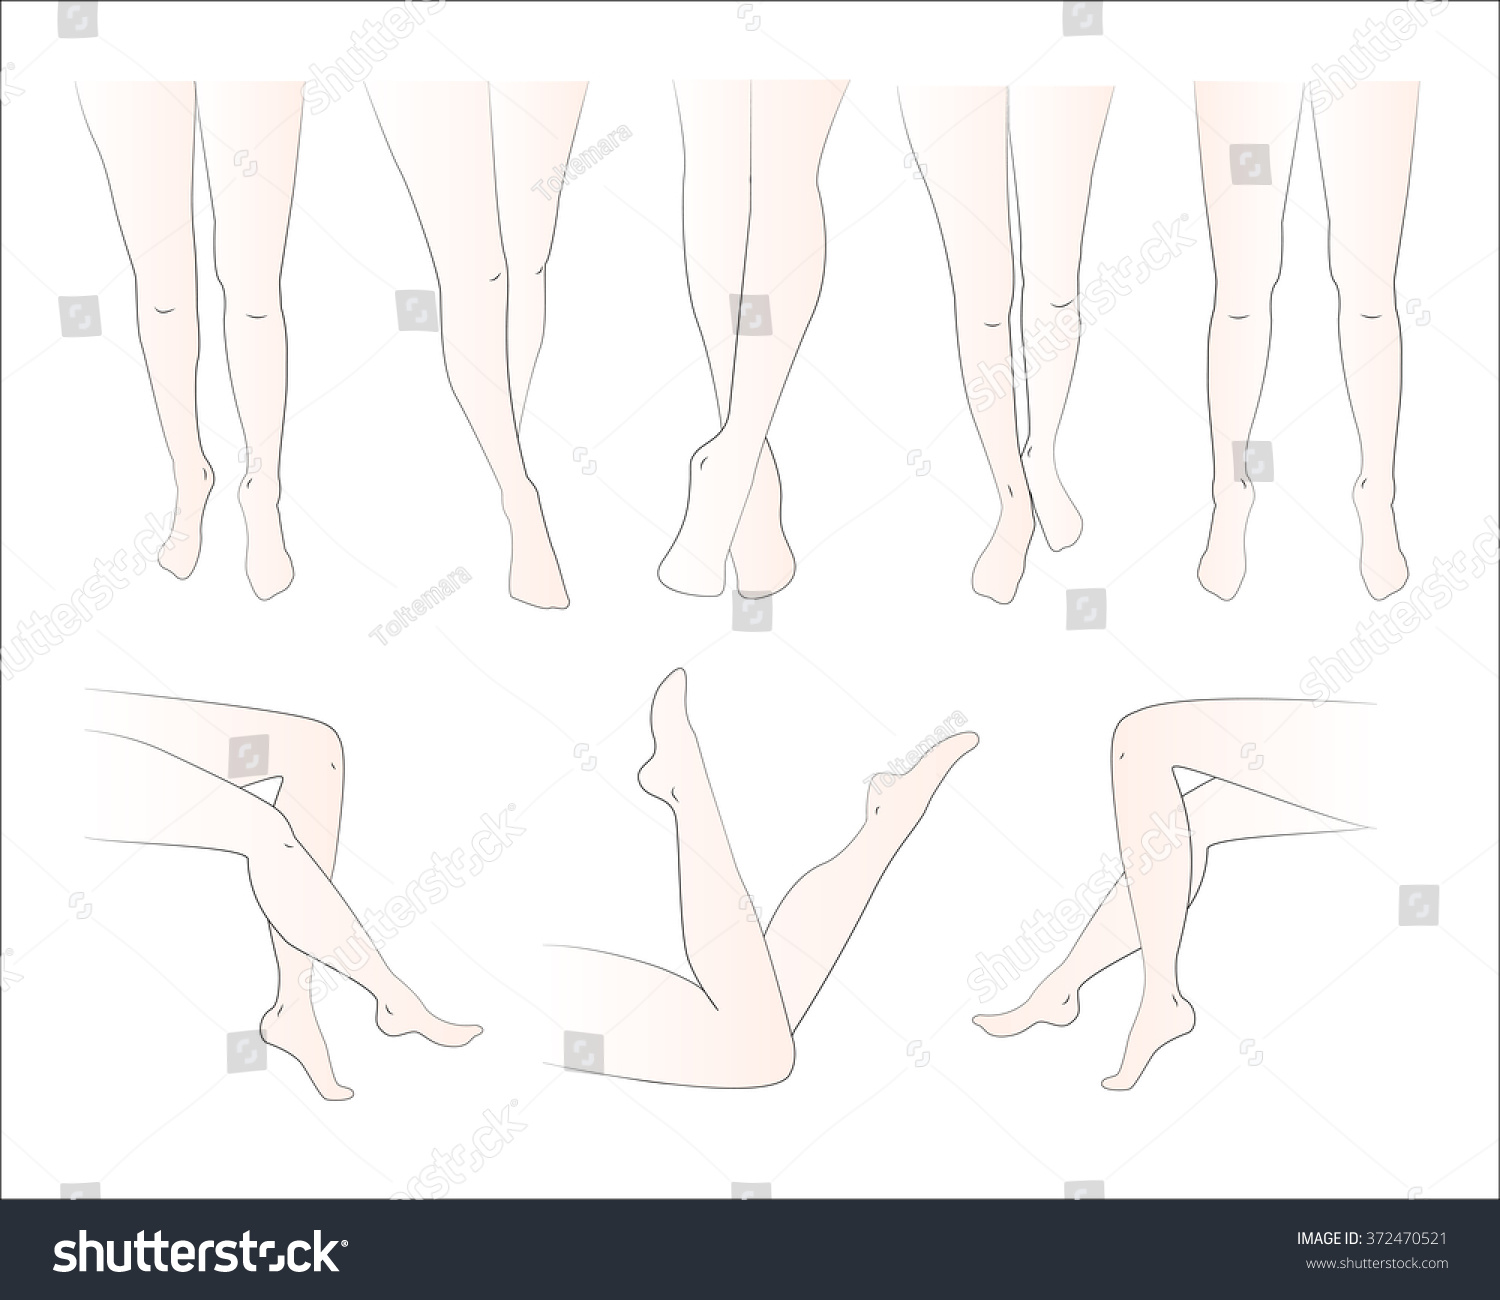 Drawing Skill Legs Crossed Drawing Picture A person's entire body changes when they sit cross legged. drawing skill legs crossed drawing picture